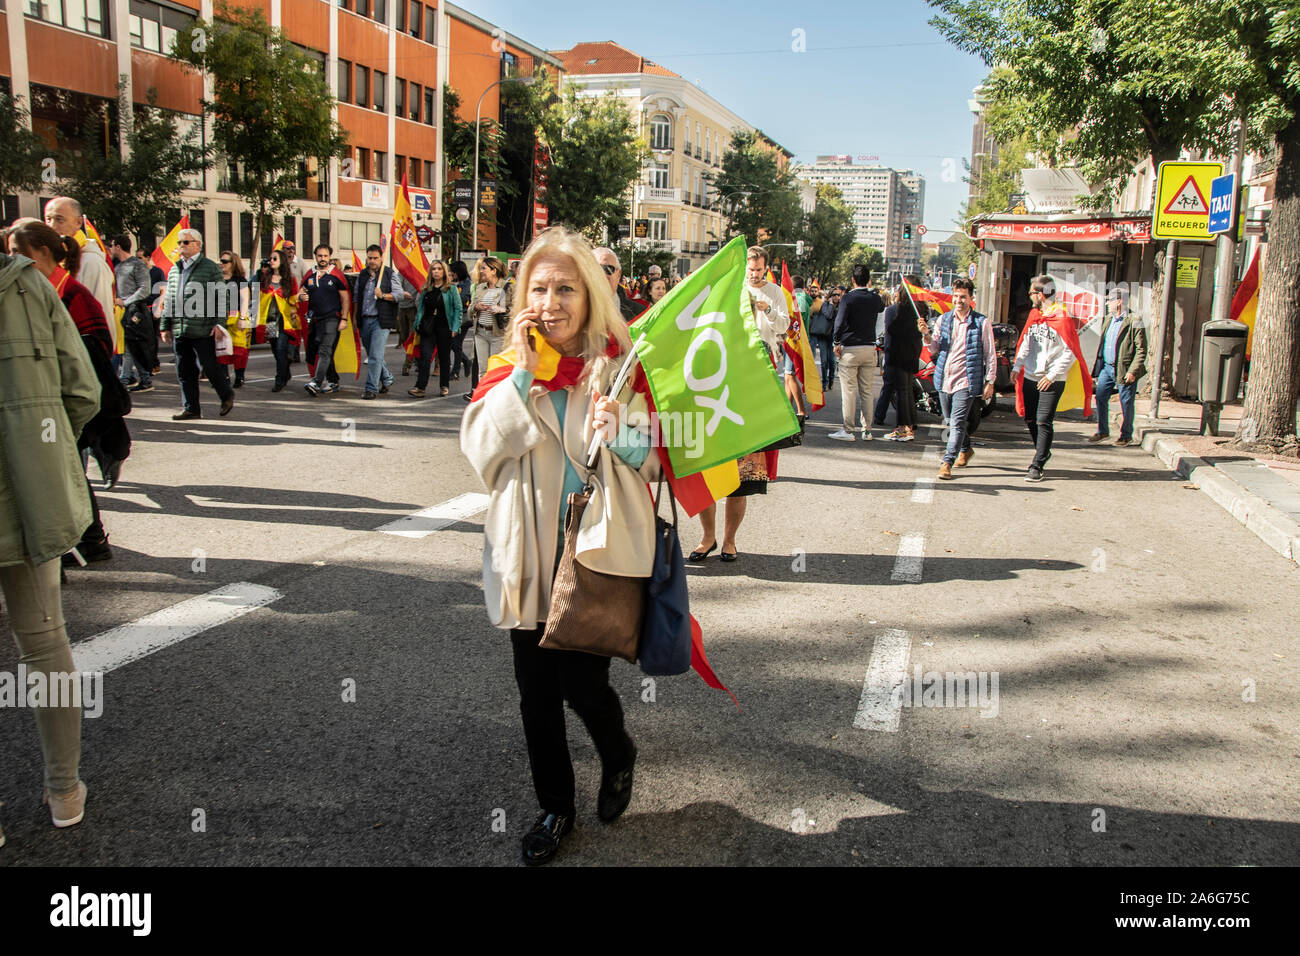 Thousands of supporters of Spain's far-right Vox party gathered in Plaza de Colón in Madrid on Saturday to defend what they described as 'the unity of Stock Photo